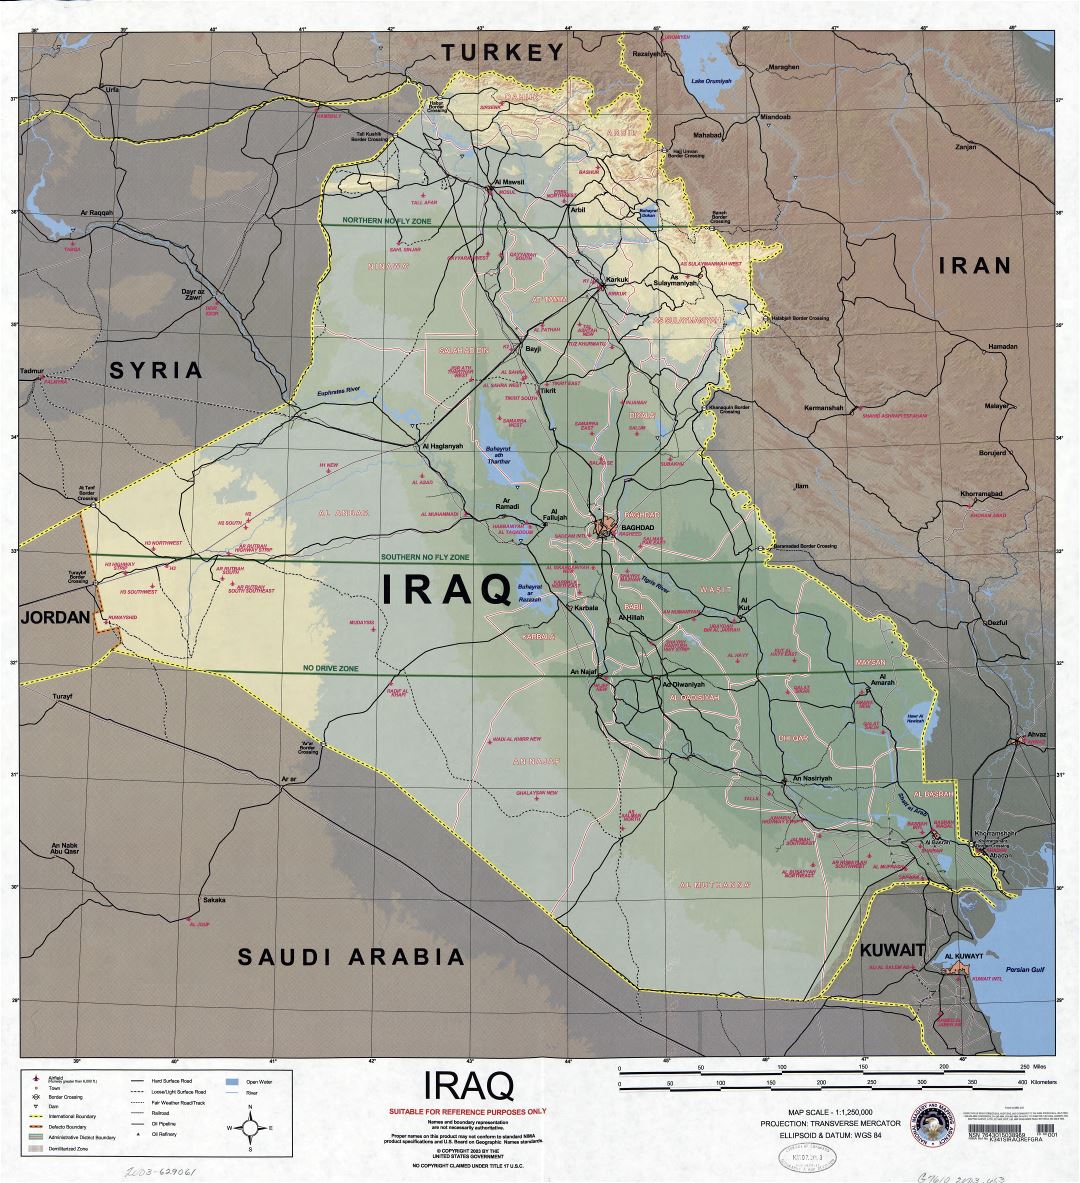 Large scale detailed map of Iraq with other marks - 2003